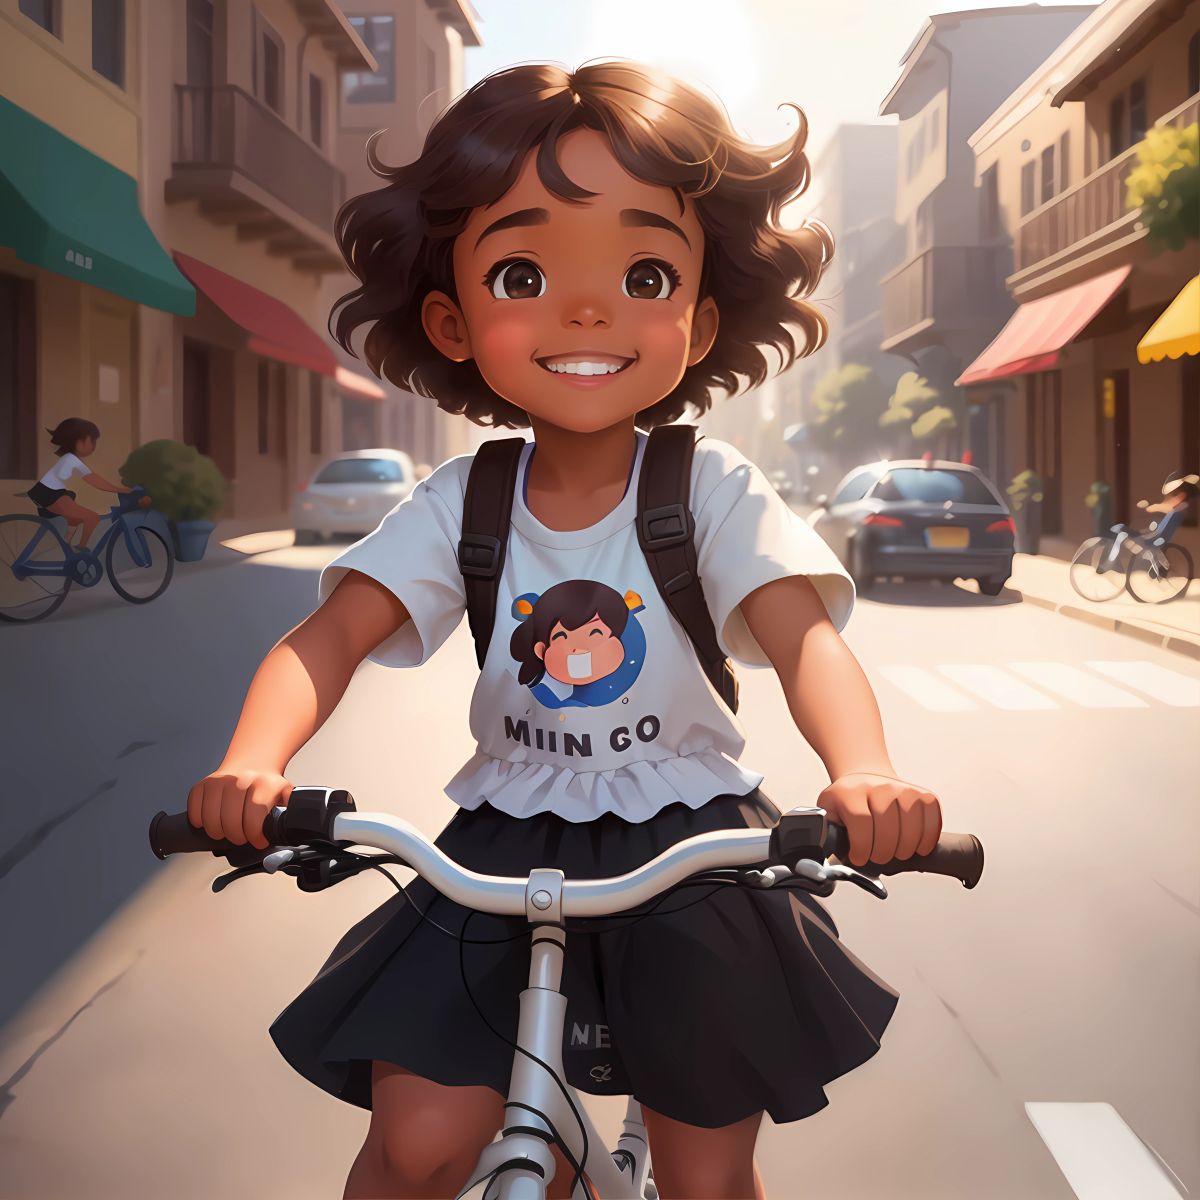 Eva riding her bicycle through the streets, with the wind in her hair and a smile on her face.